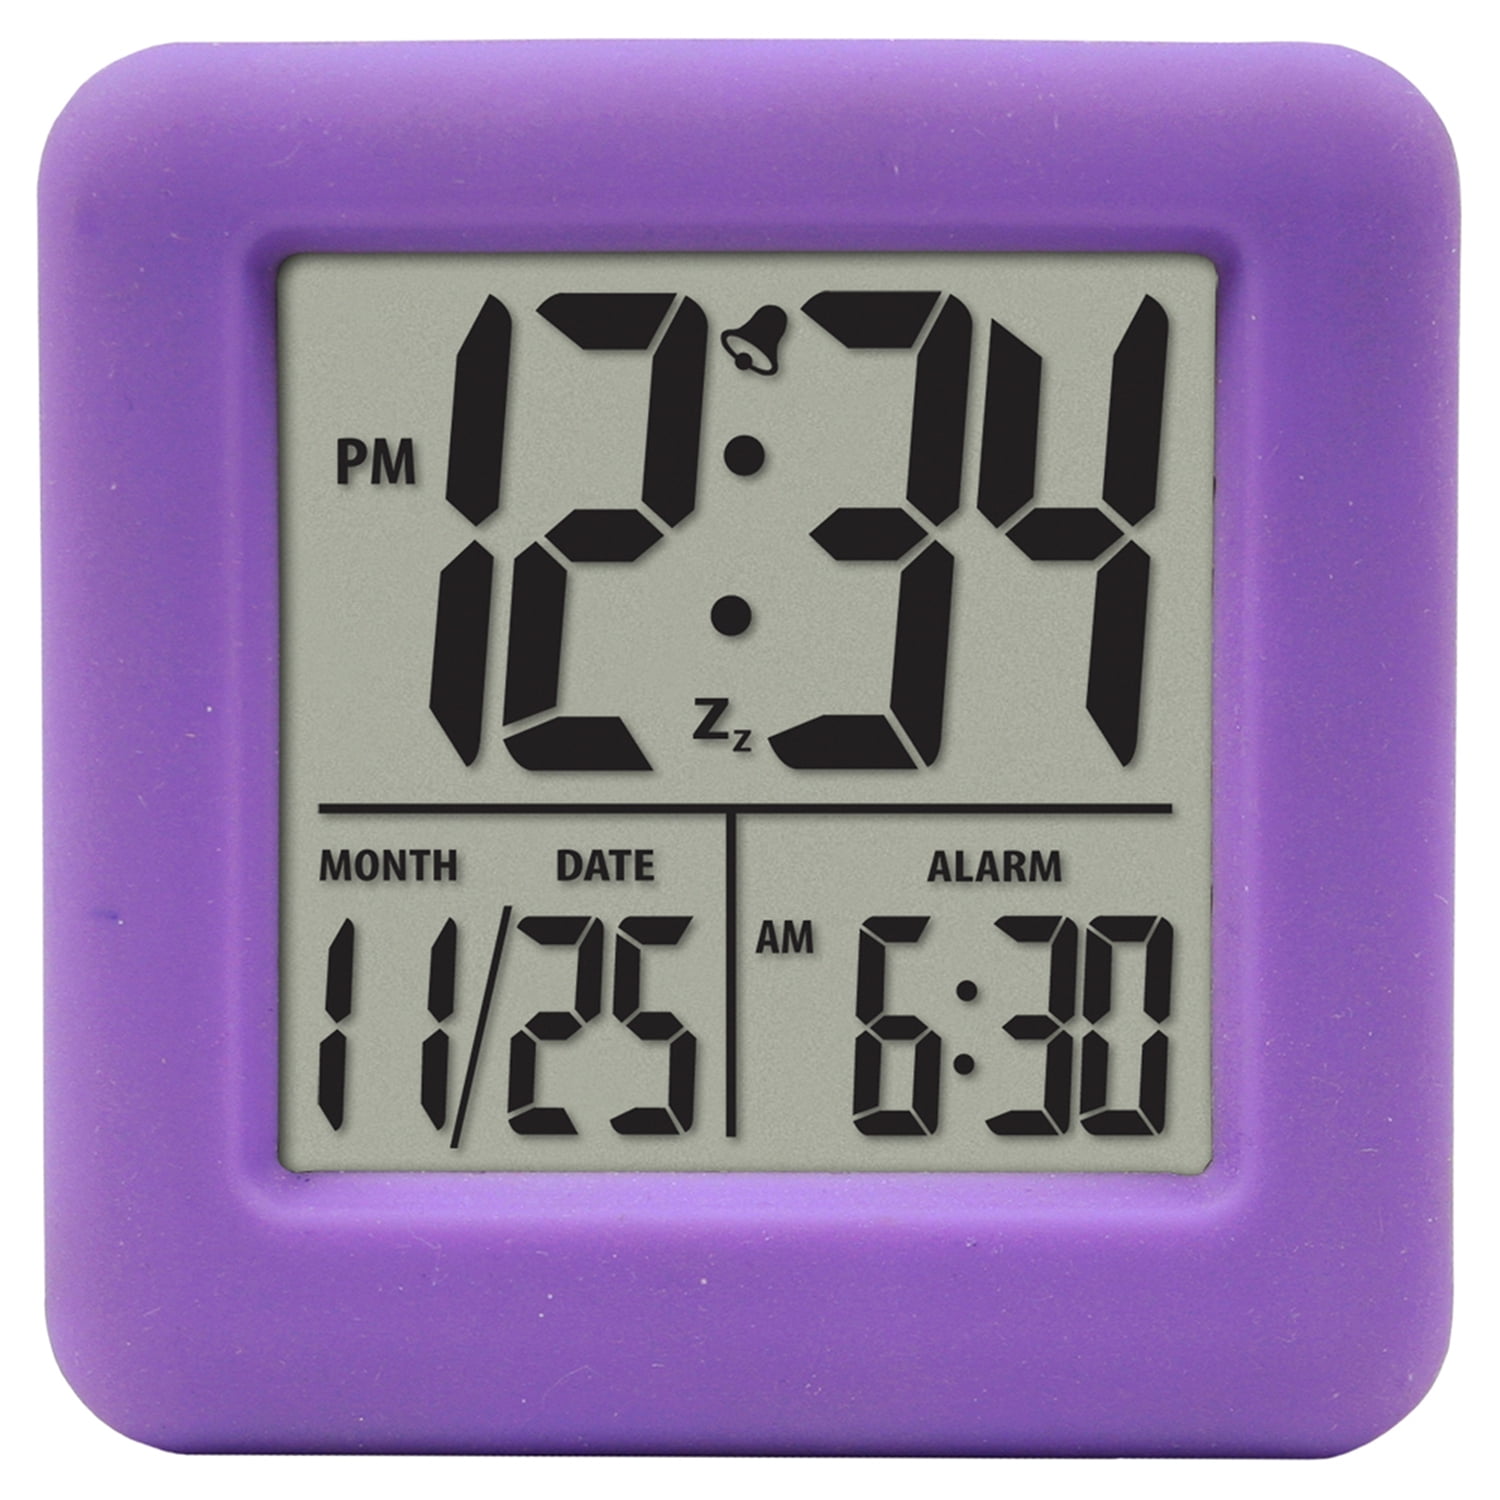 Equity by La Crosse Digital Cube Alarm Clock with On-Demand Backlight, 70909